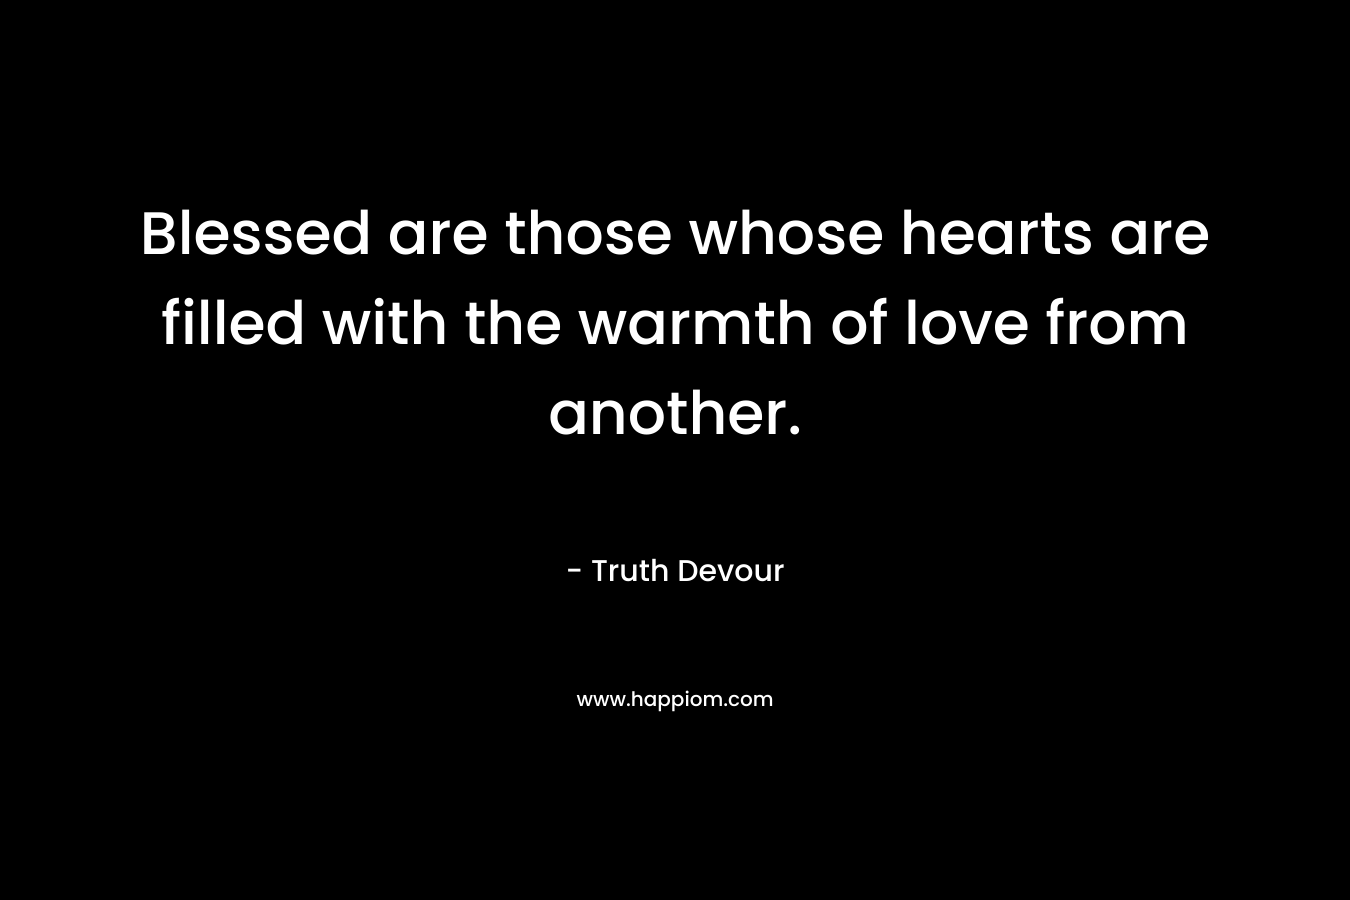 Blessed are those whose hearts are filled with the warmth of love from another.